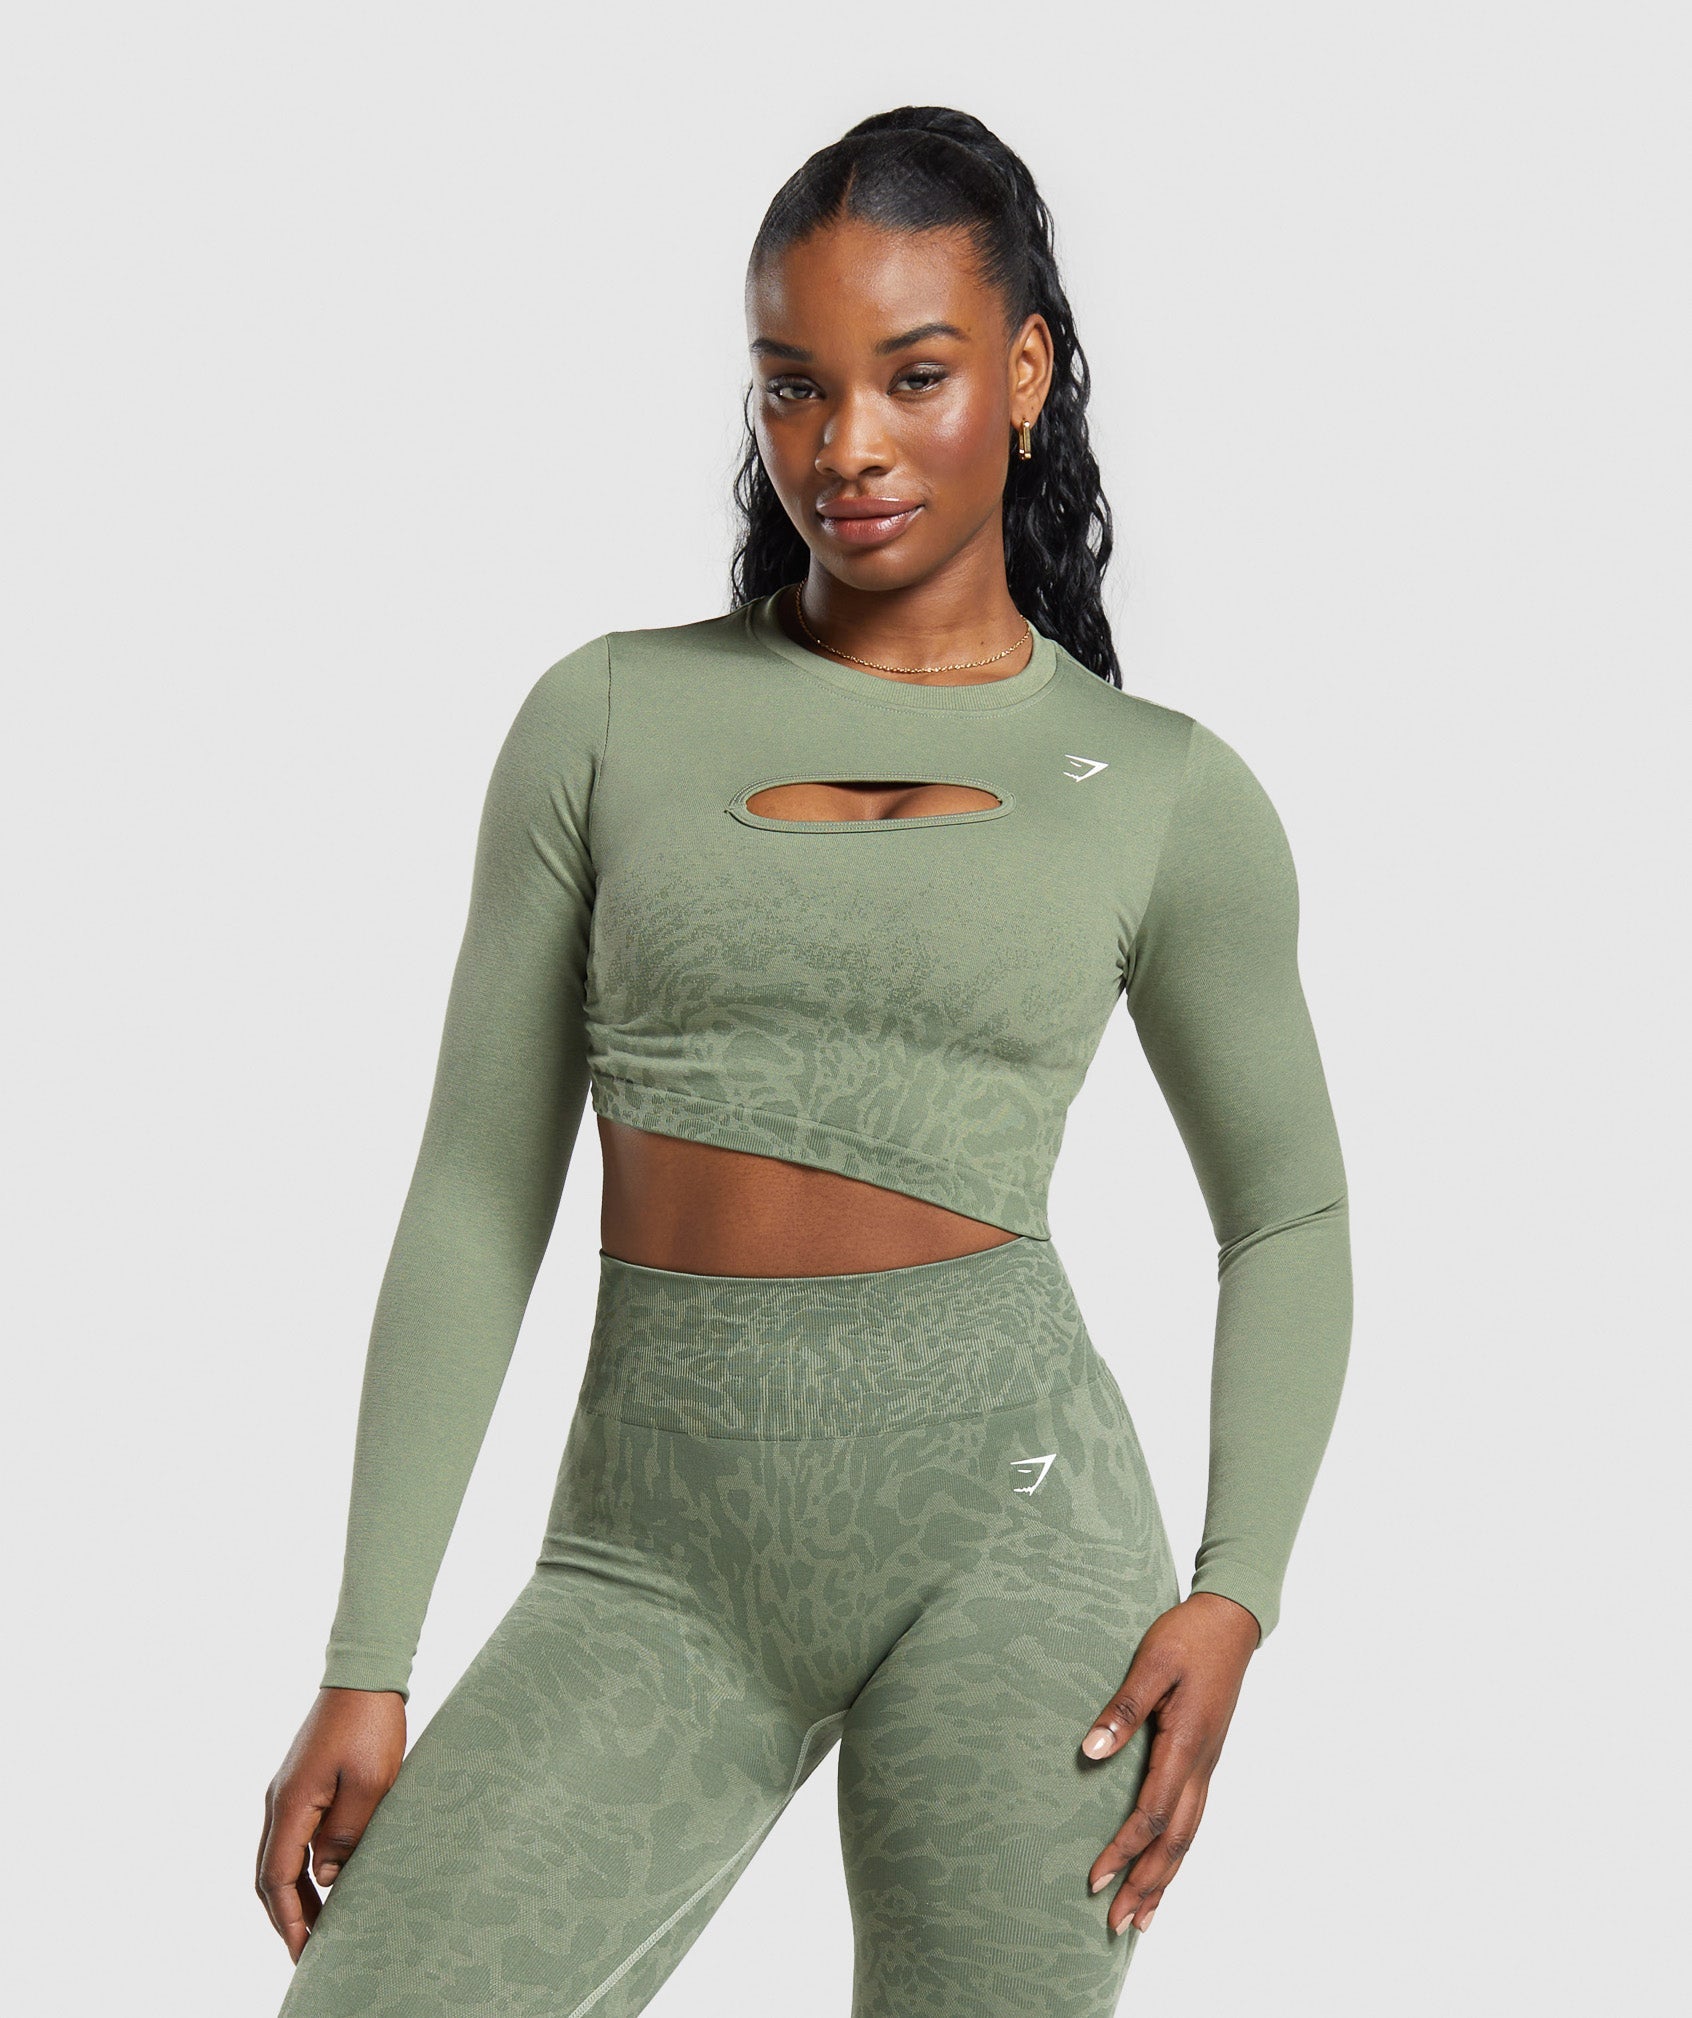 Adapt Safari Seamless Faded Long Sleeve Top in Force Green/Faded Green - view 1